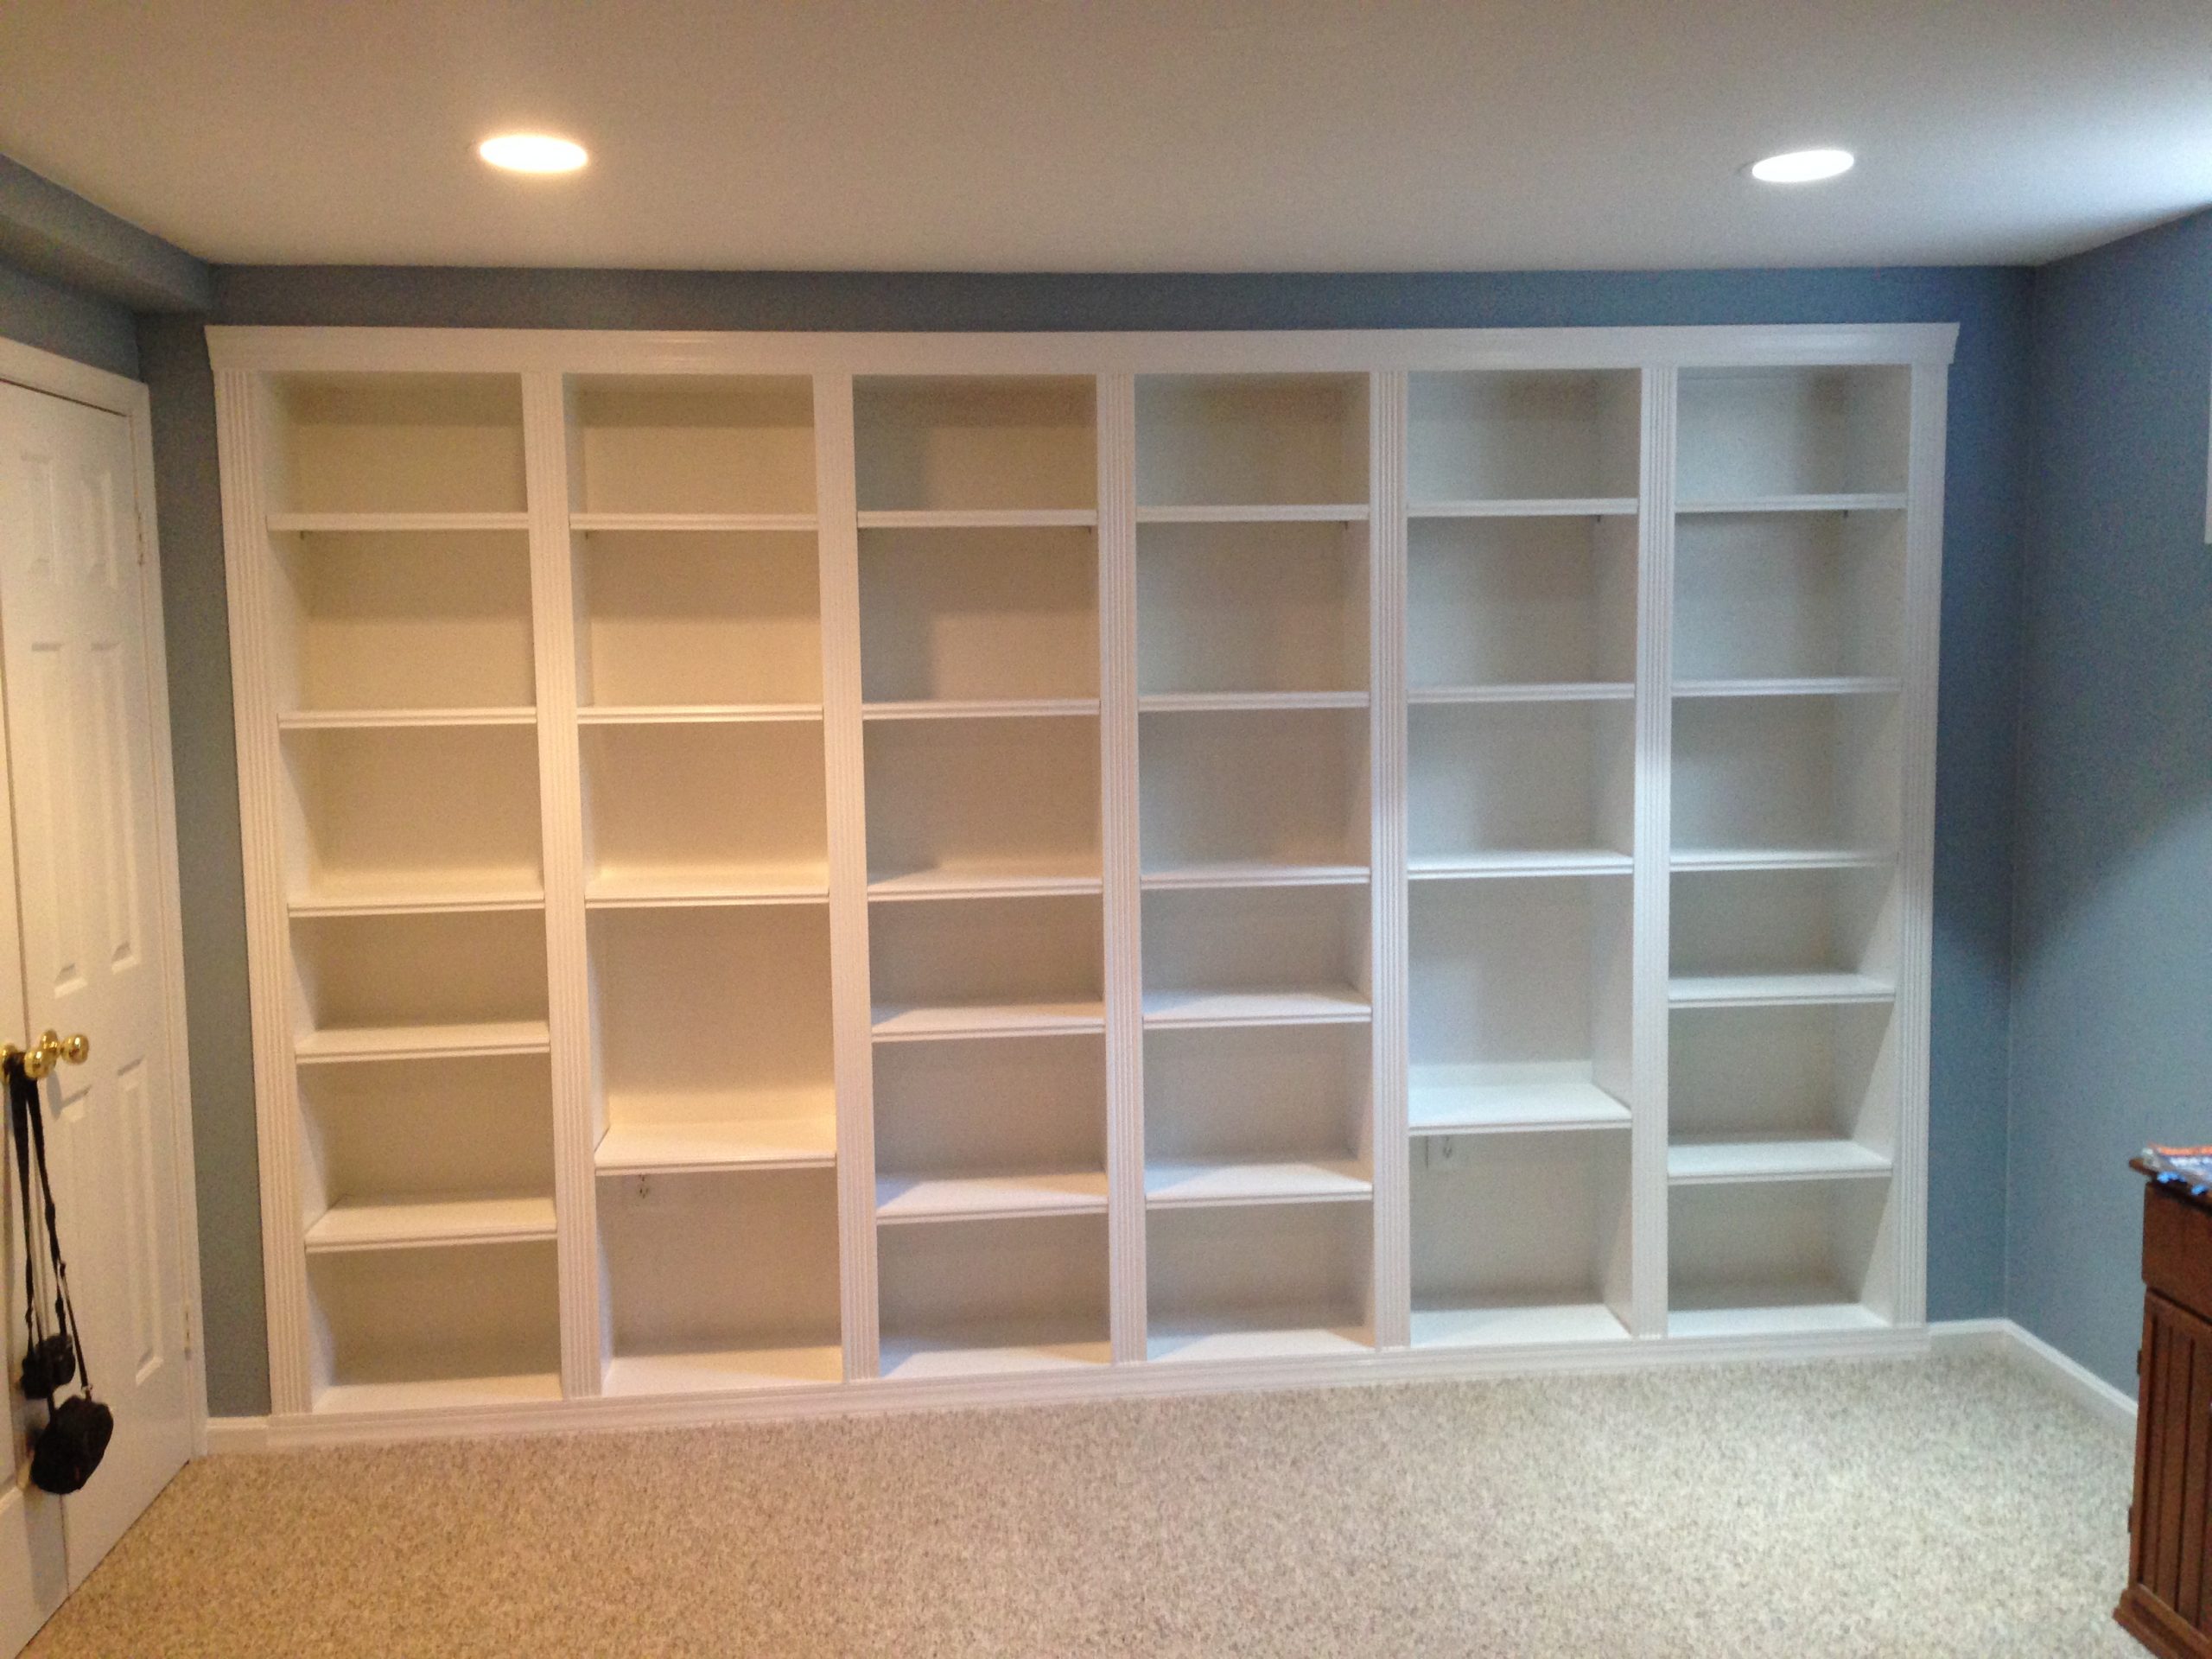 Built In Bookcases 5 Steps Instructables with size 3264 X 2448